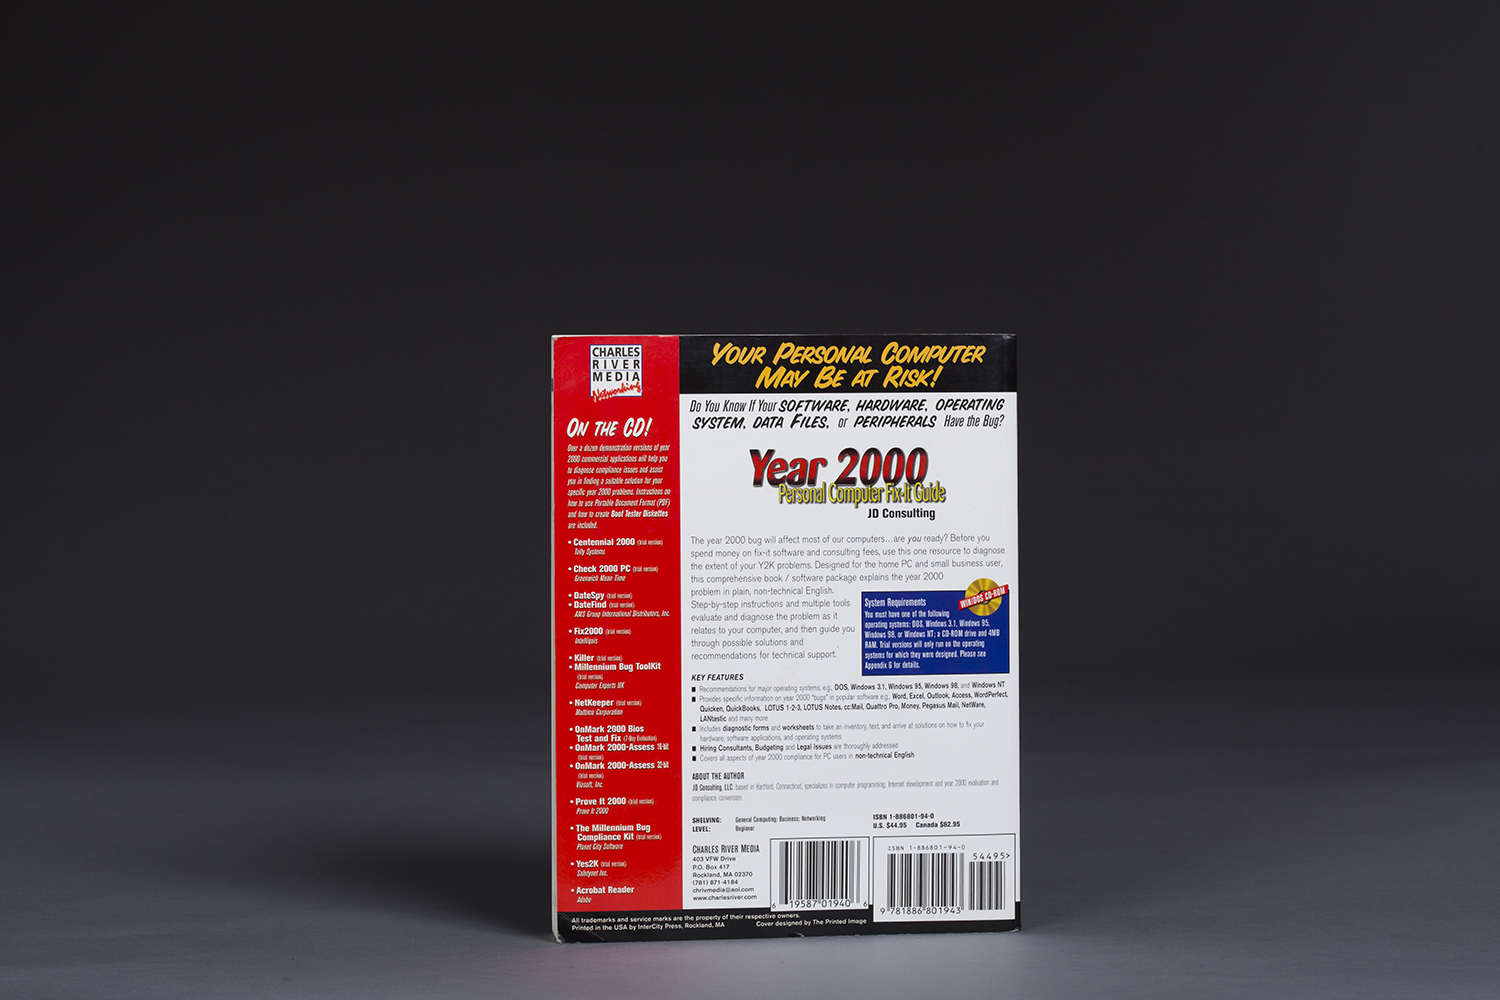 Year 2000 Personal Computer Fix-It Guide - 0081 Back.jpg